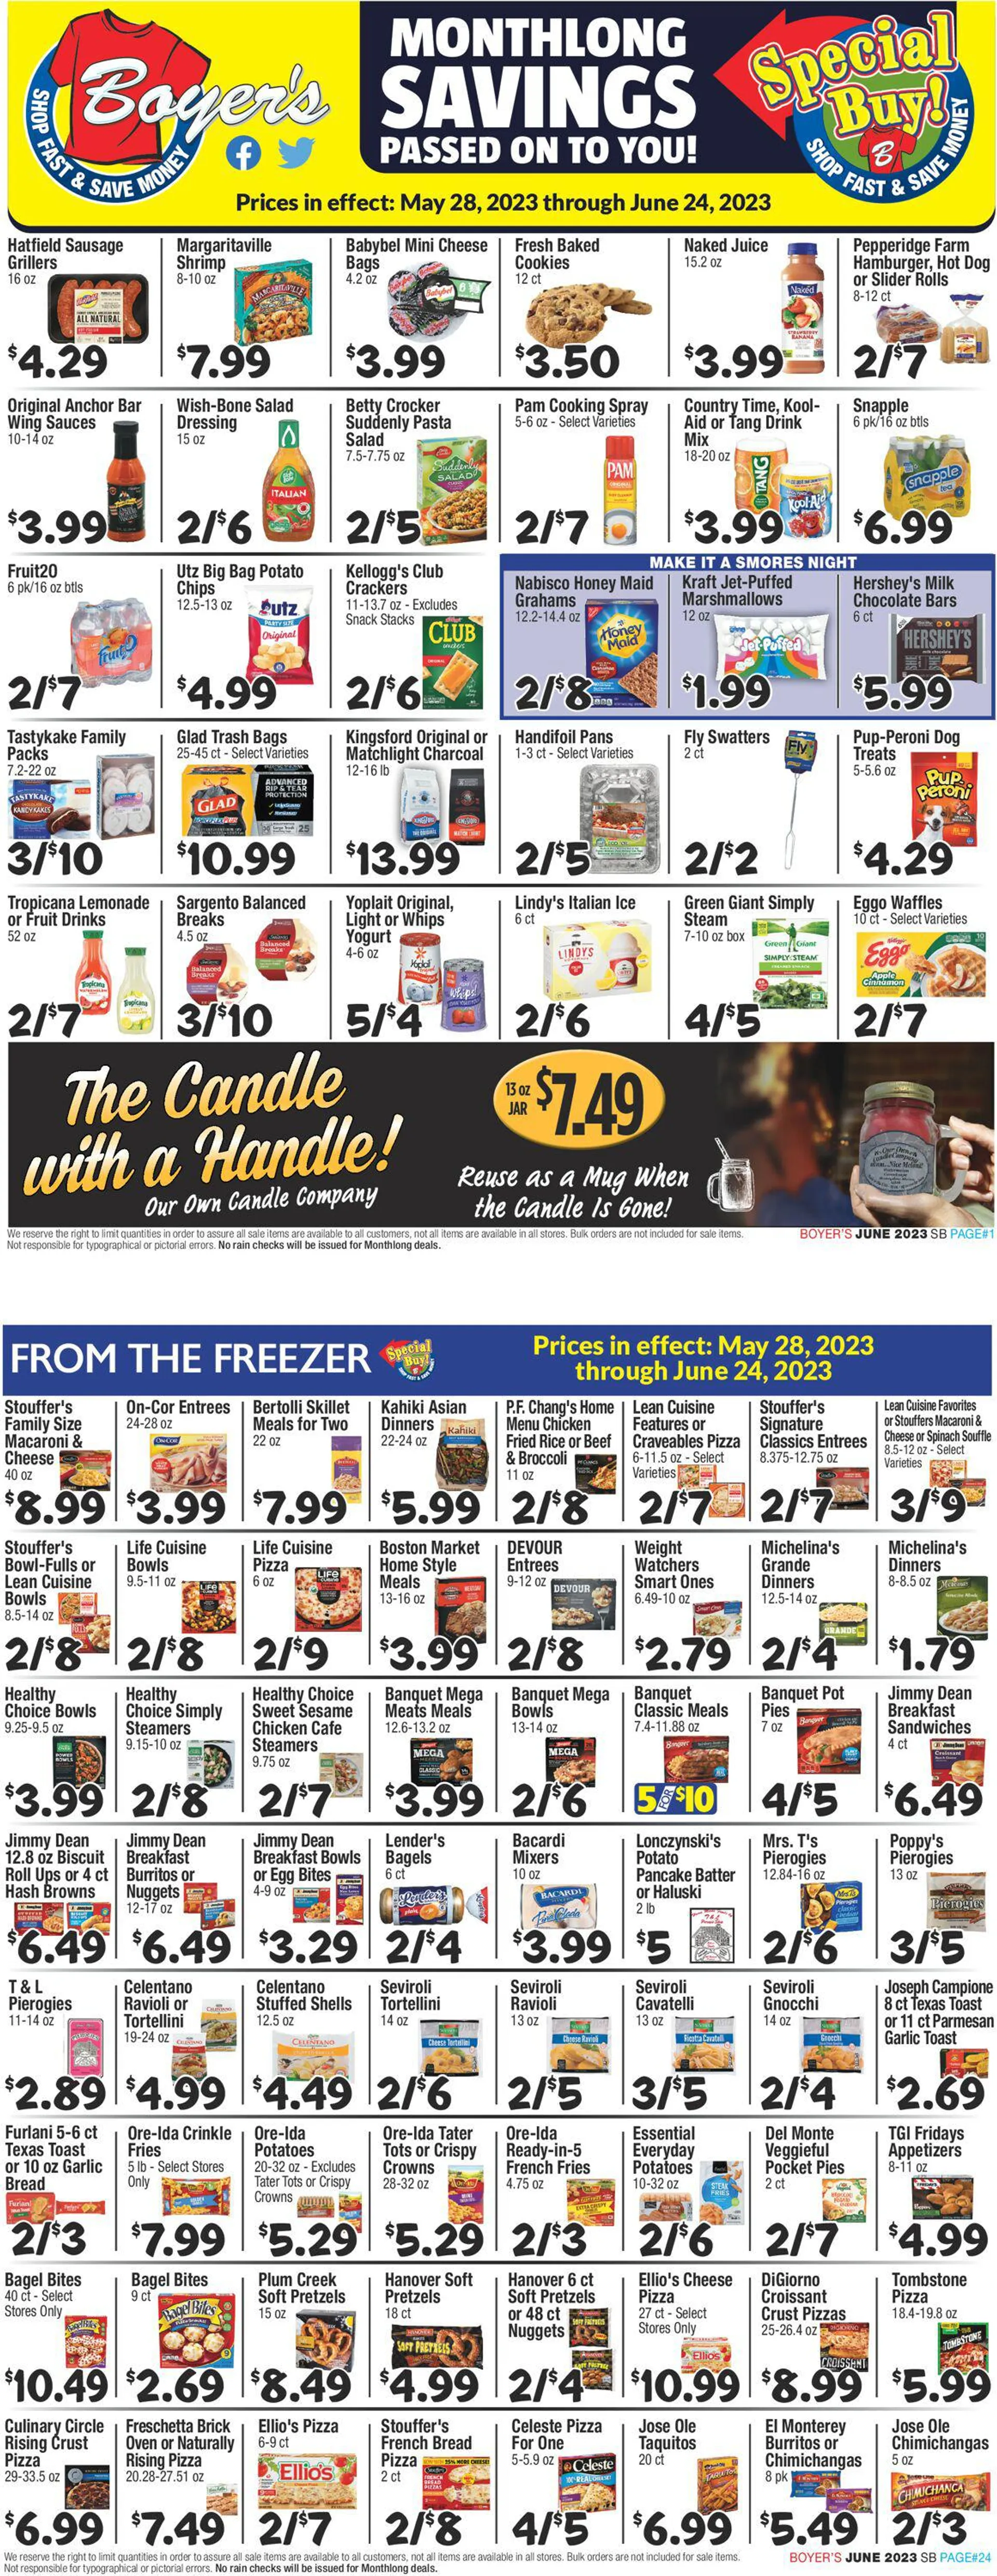 Boyers Food Markets Current weekly ad - 1